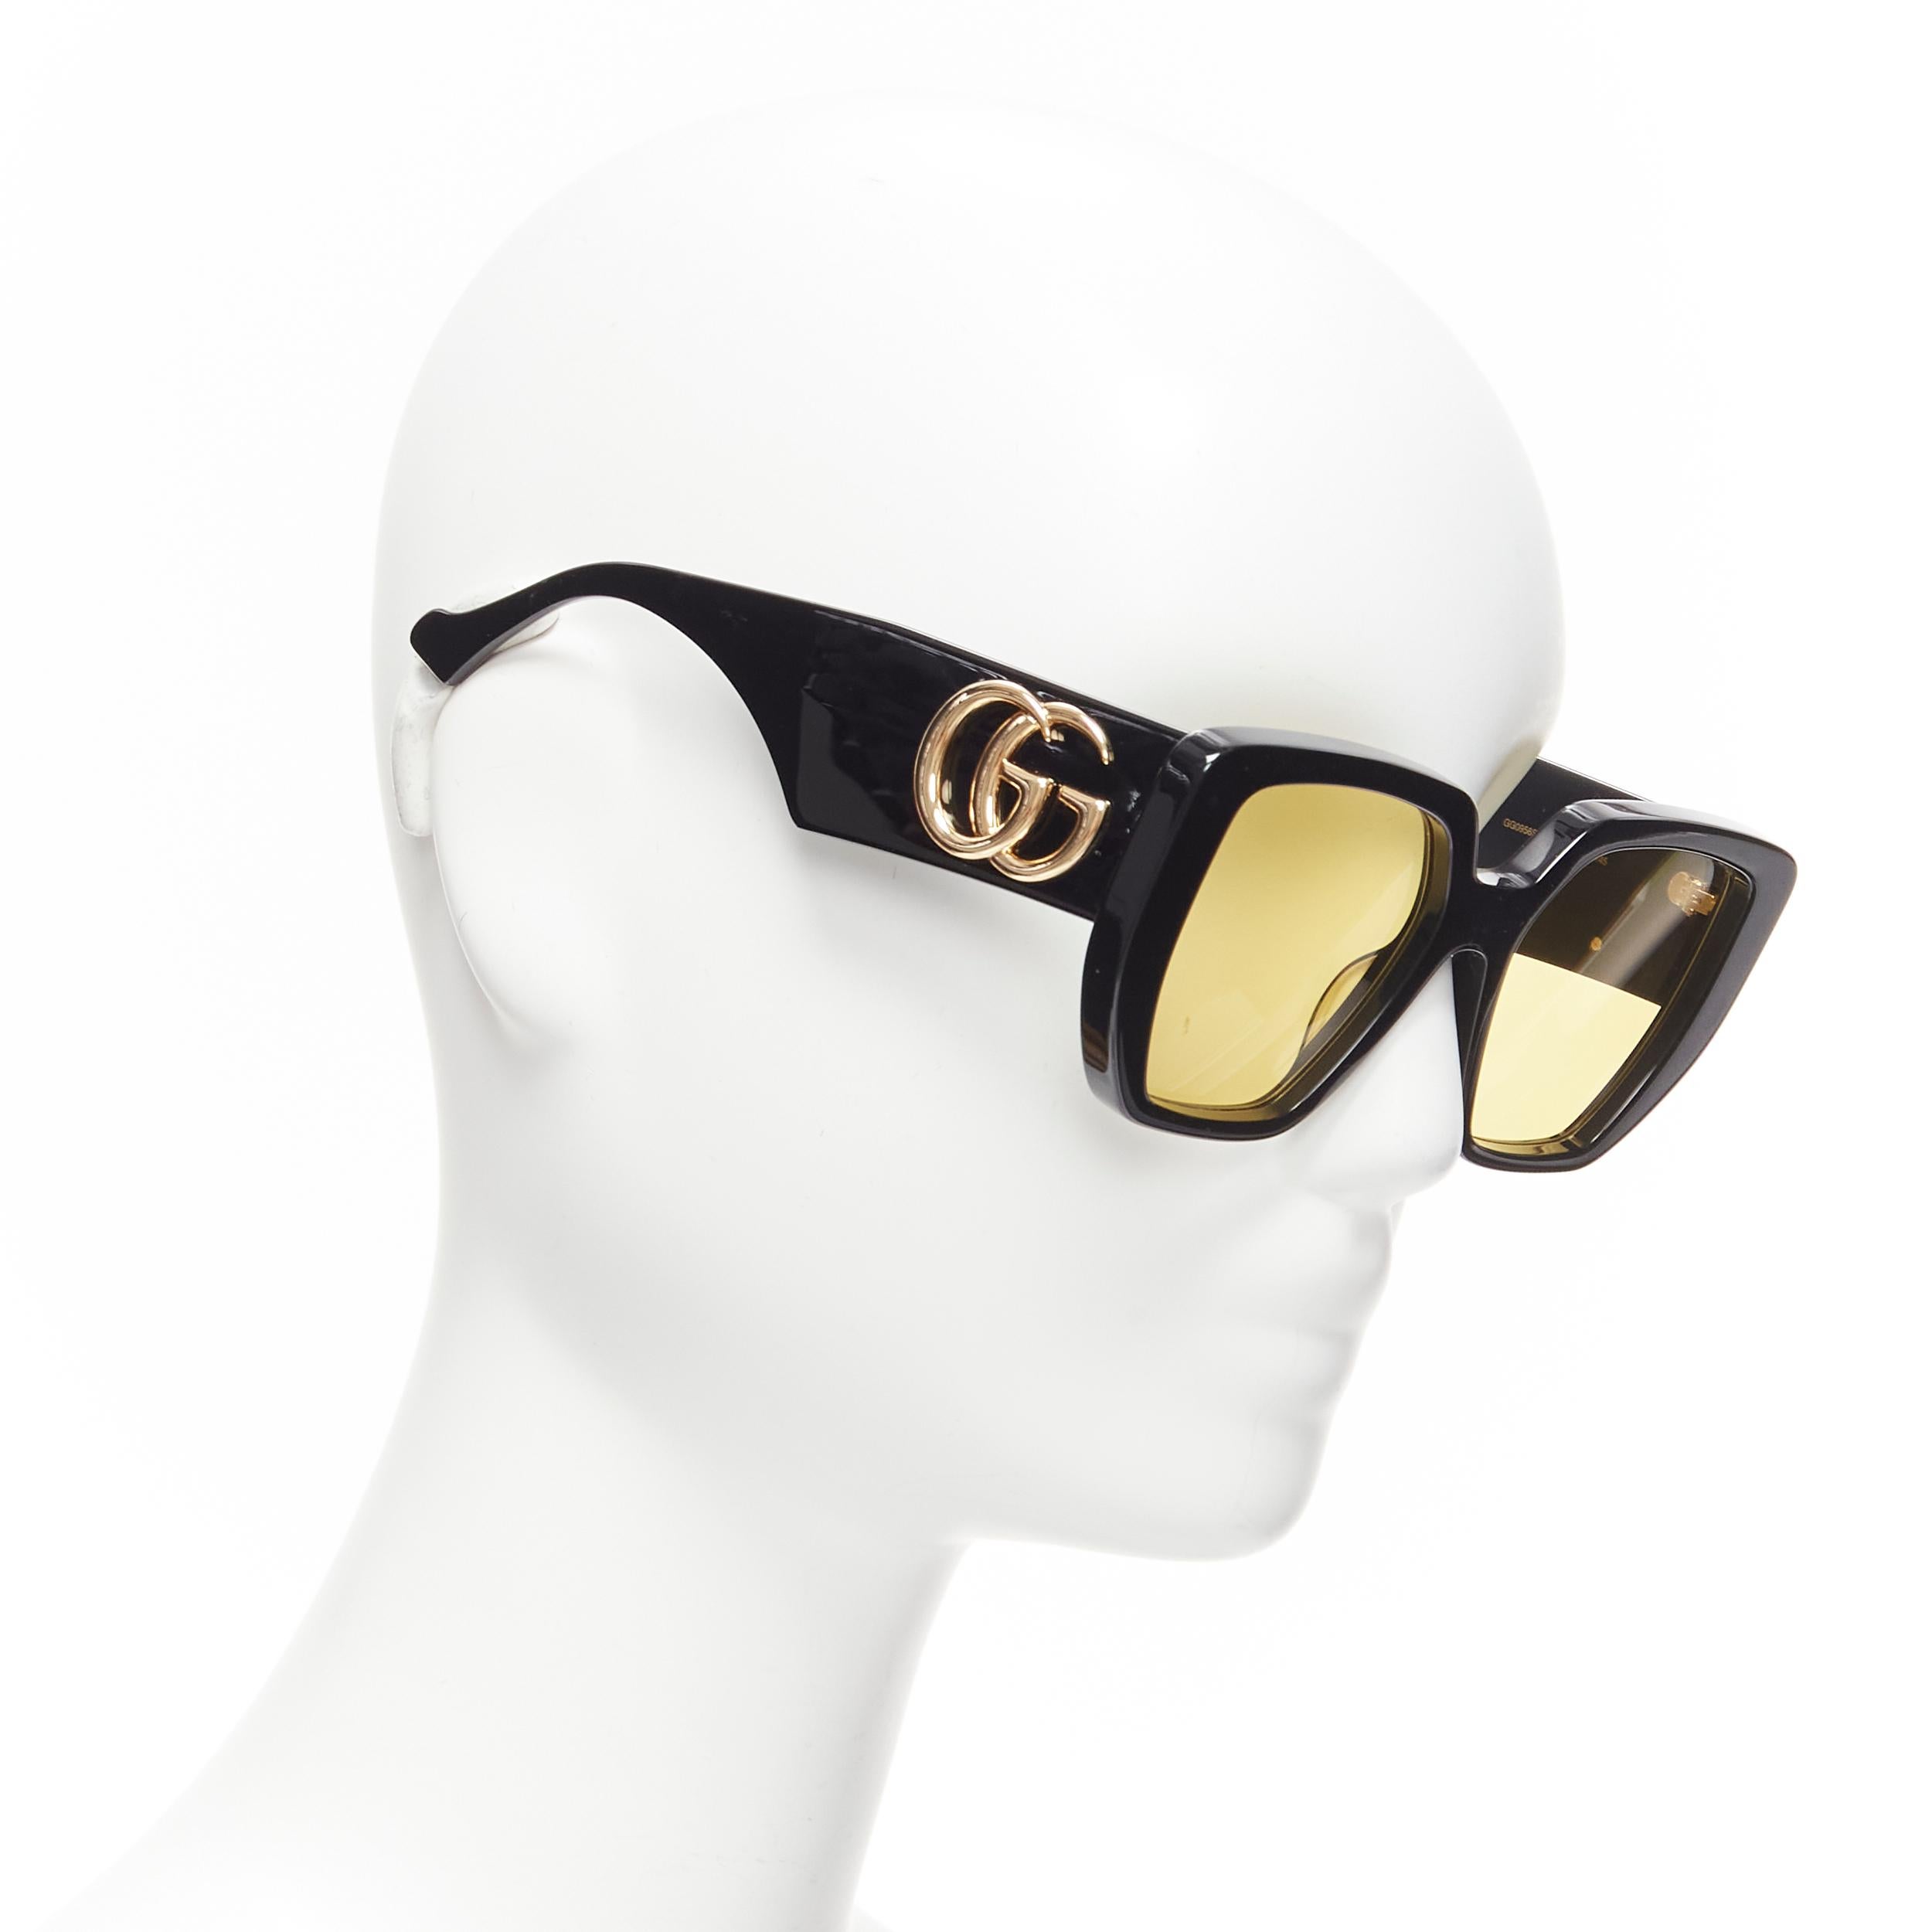 GUCCI GG0956S black gold GG logo yellow lens oversized sunglasses
Reference: TGAS/D01031
Brand: Gucci
Designer: Alessandro Michele
Model: GG0956S
Material: Acetate
Color: Black, Gold
Pattern: Solid
Lining: Black Acetate
Extra Details: Logo at